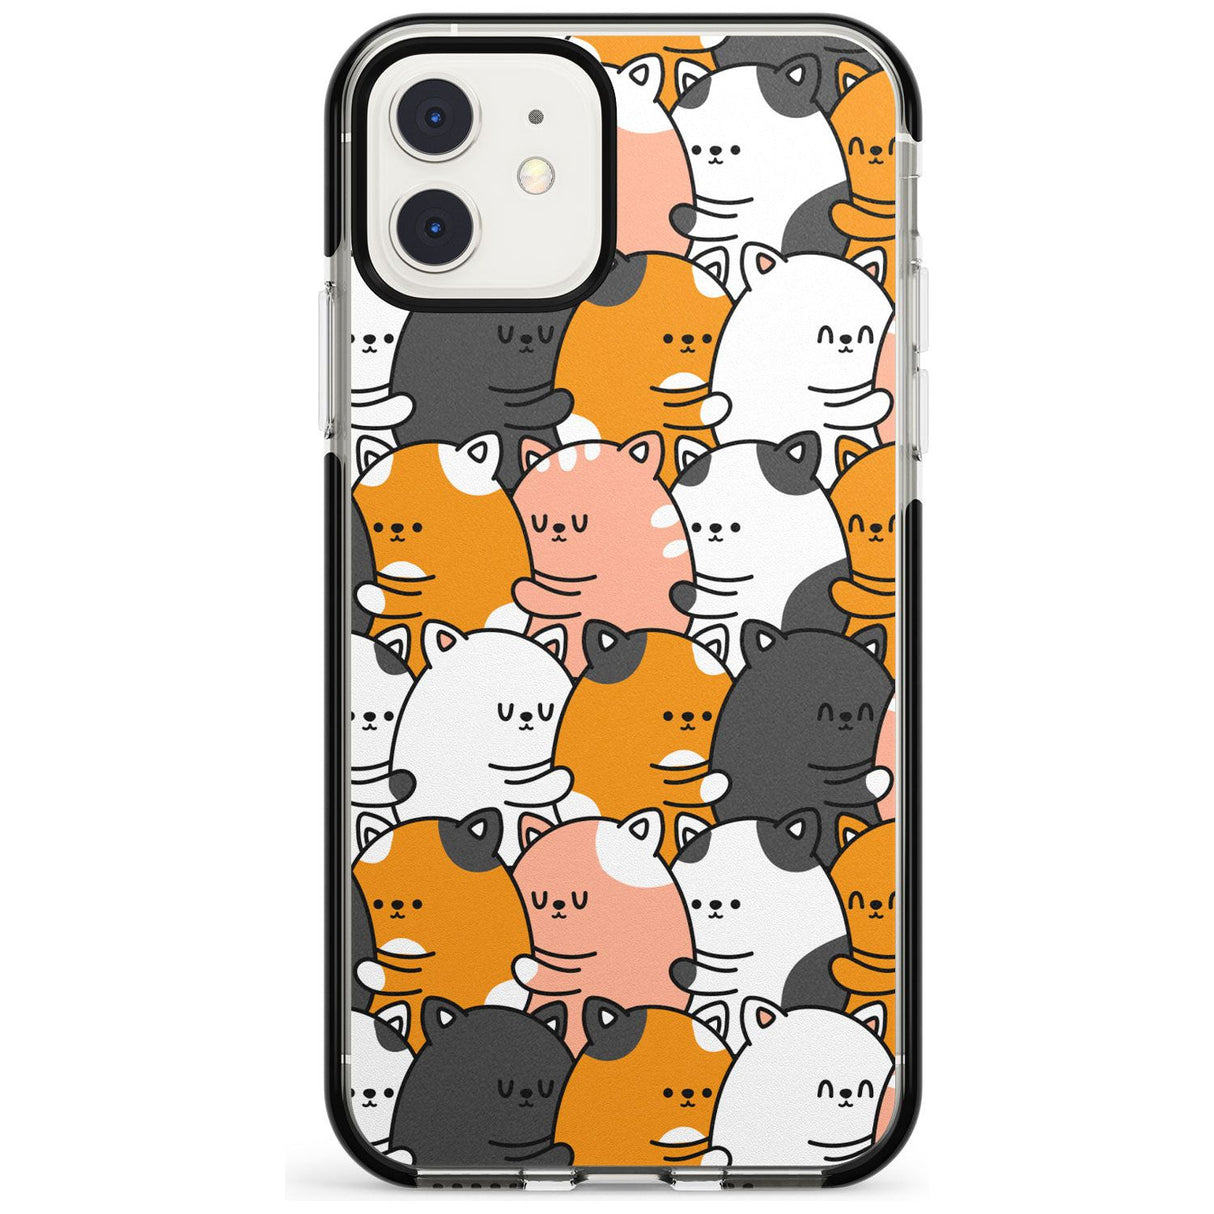 Spooning Cats Kawaii Pattern Black Impact Phone Case for iPhone 11 Pro Max